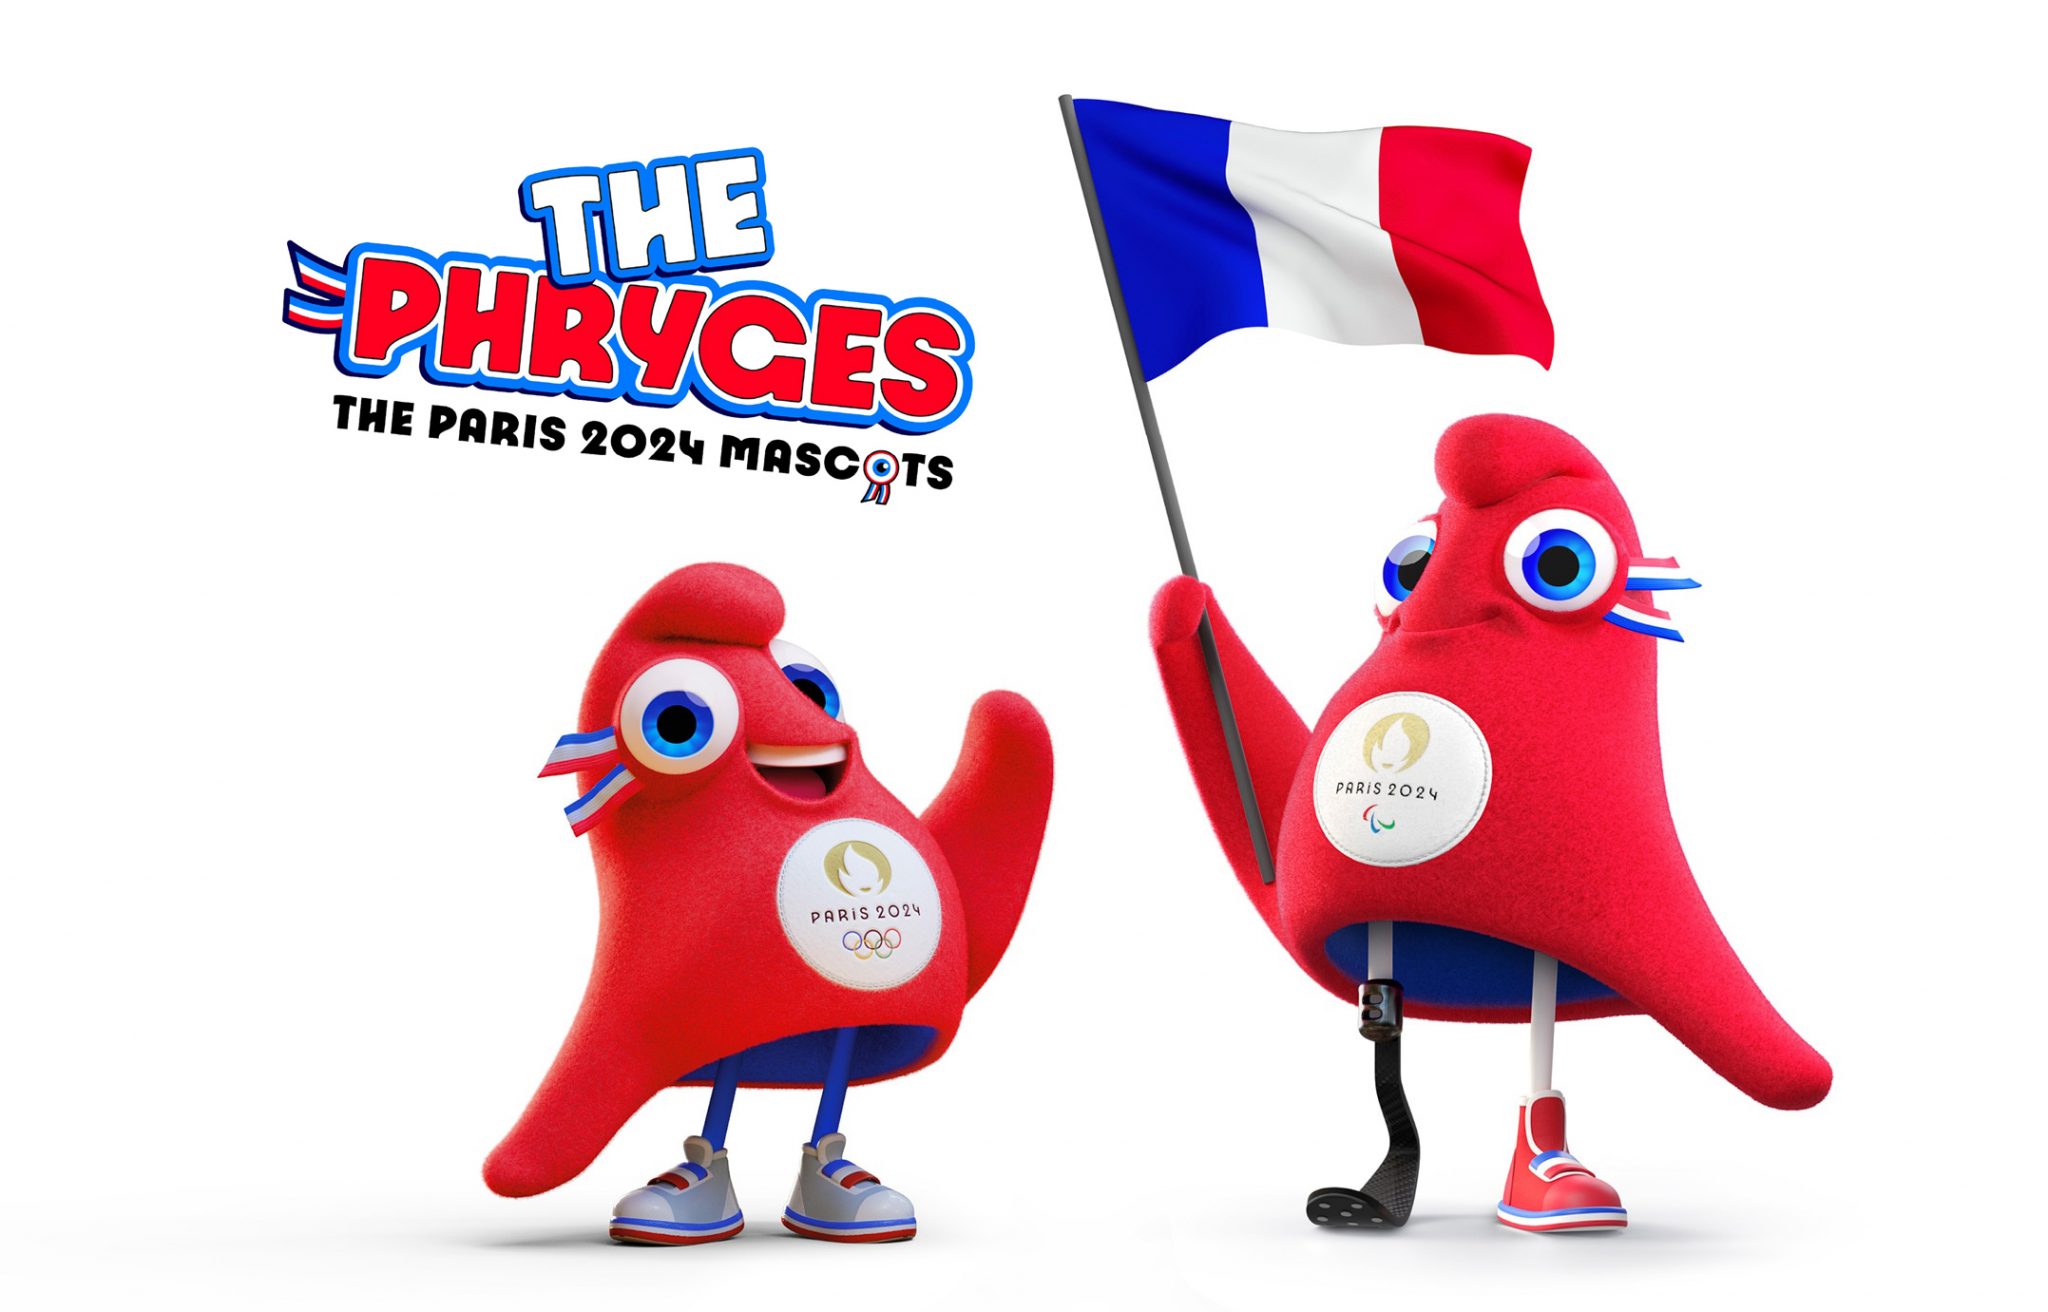 Paris 2024 reveals “Phrygian” Olympic and Paralympic mascots